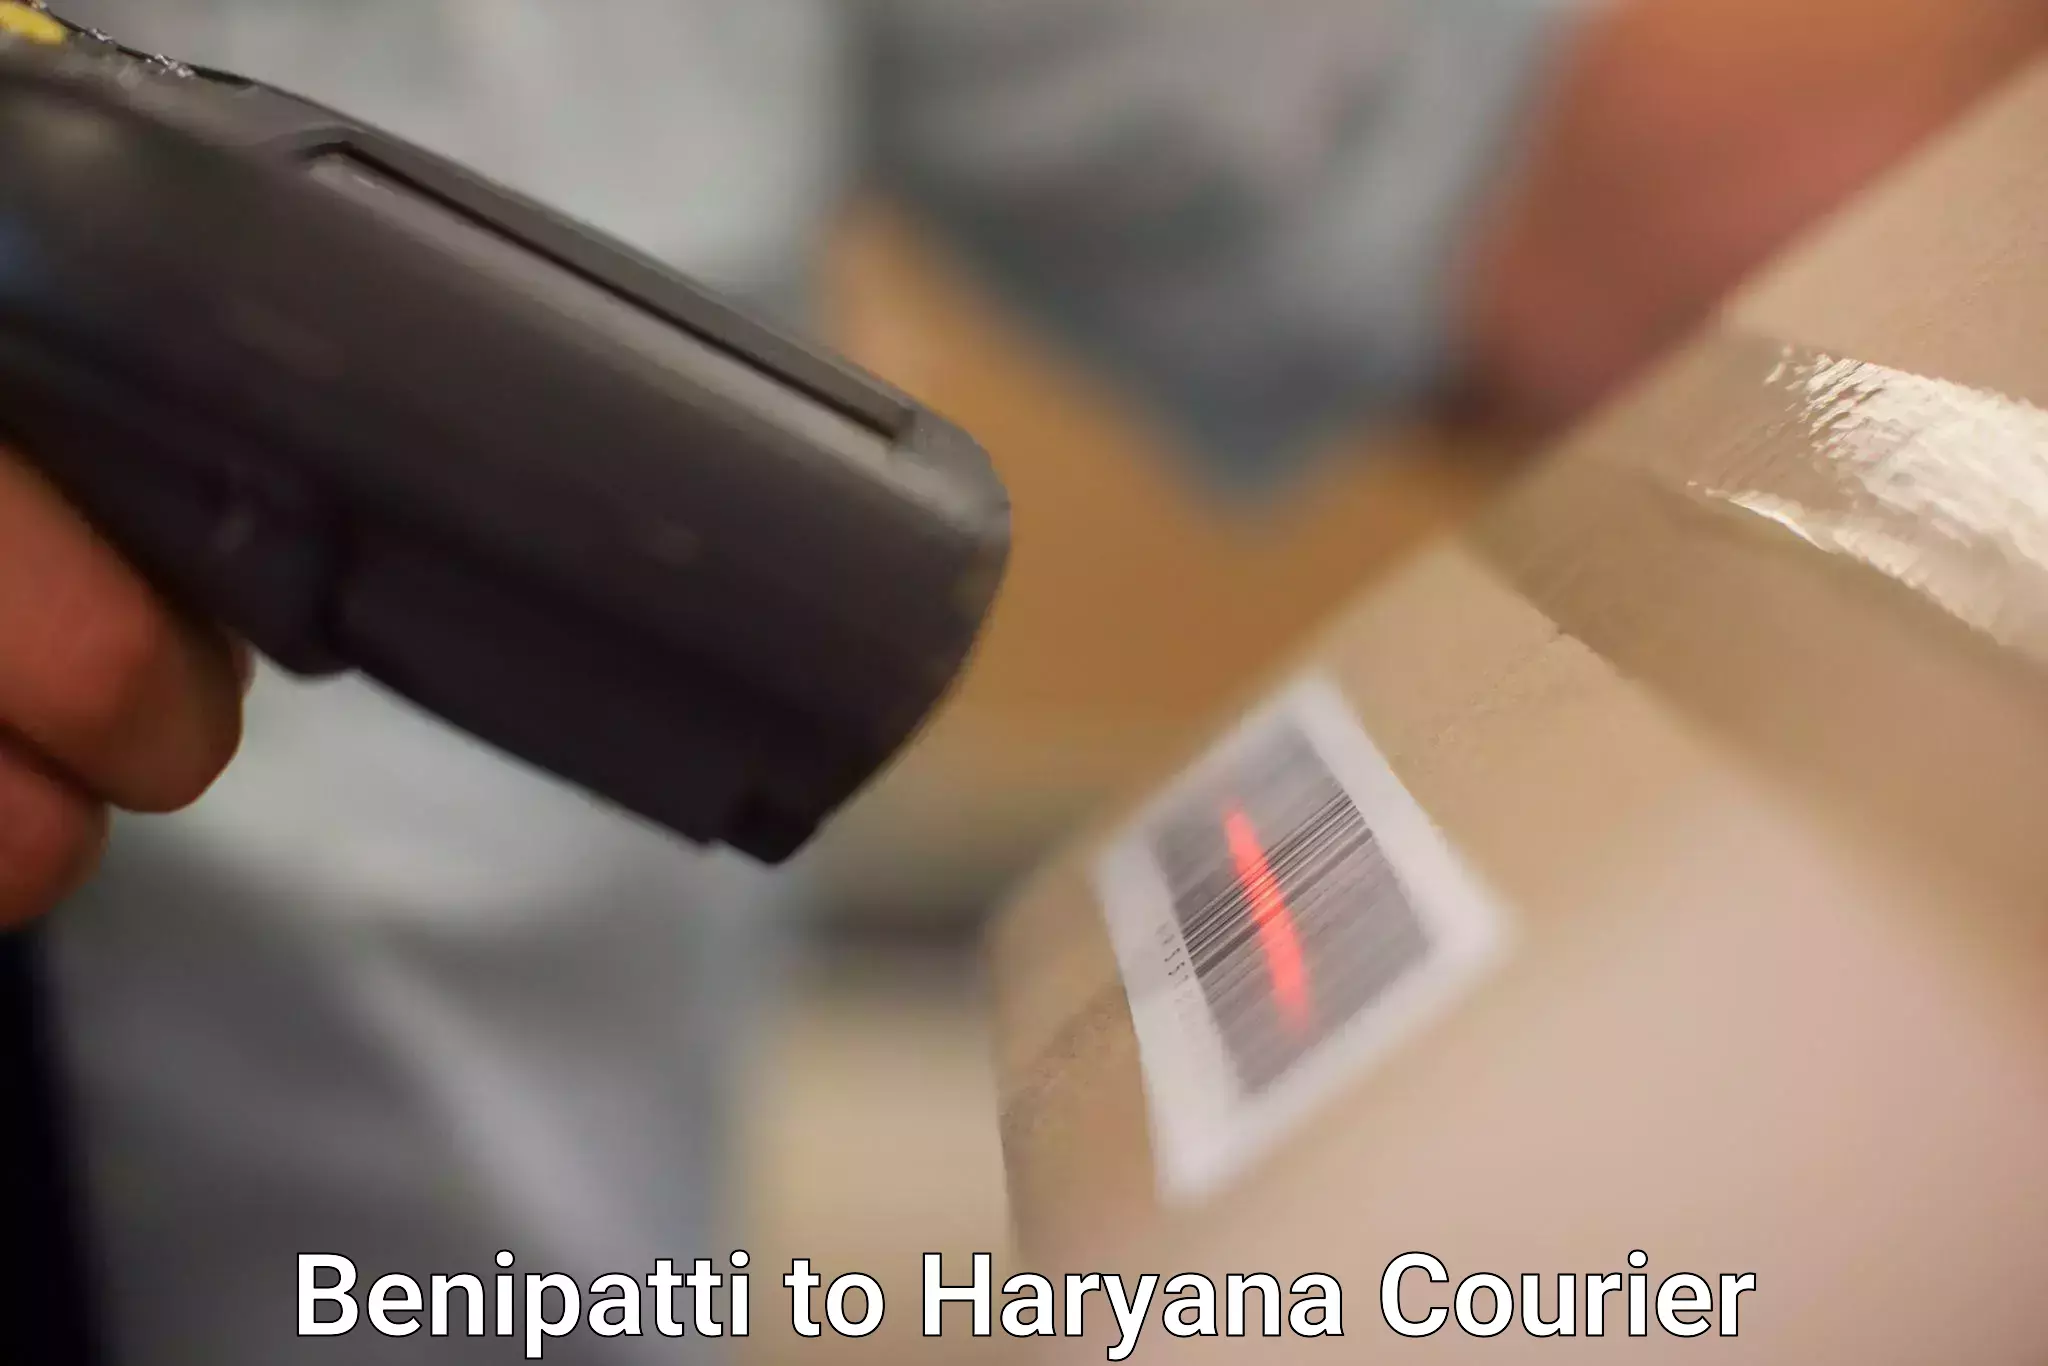 Flexible delivery schedules Benipatti to Haryana